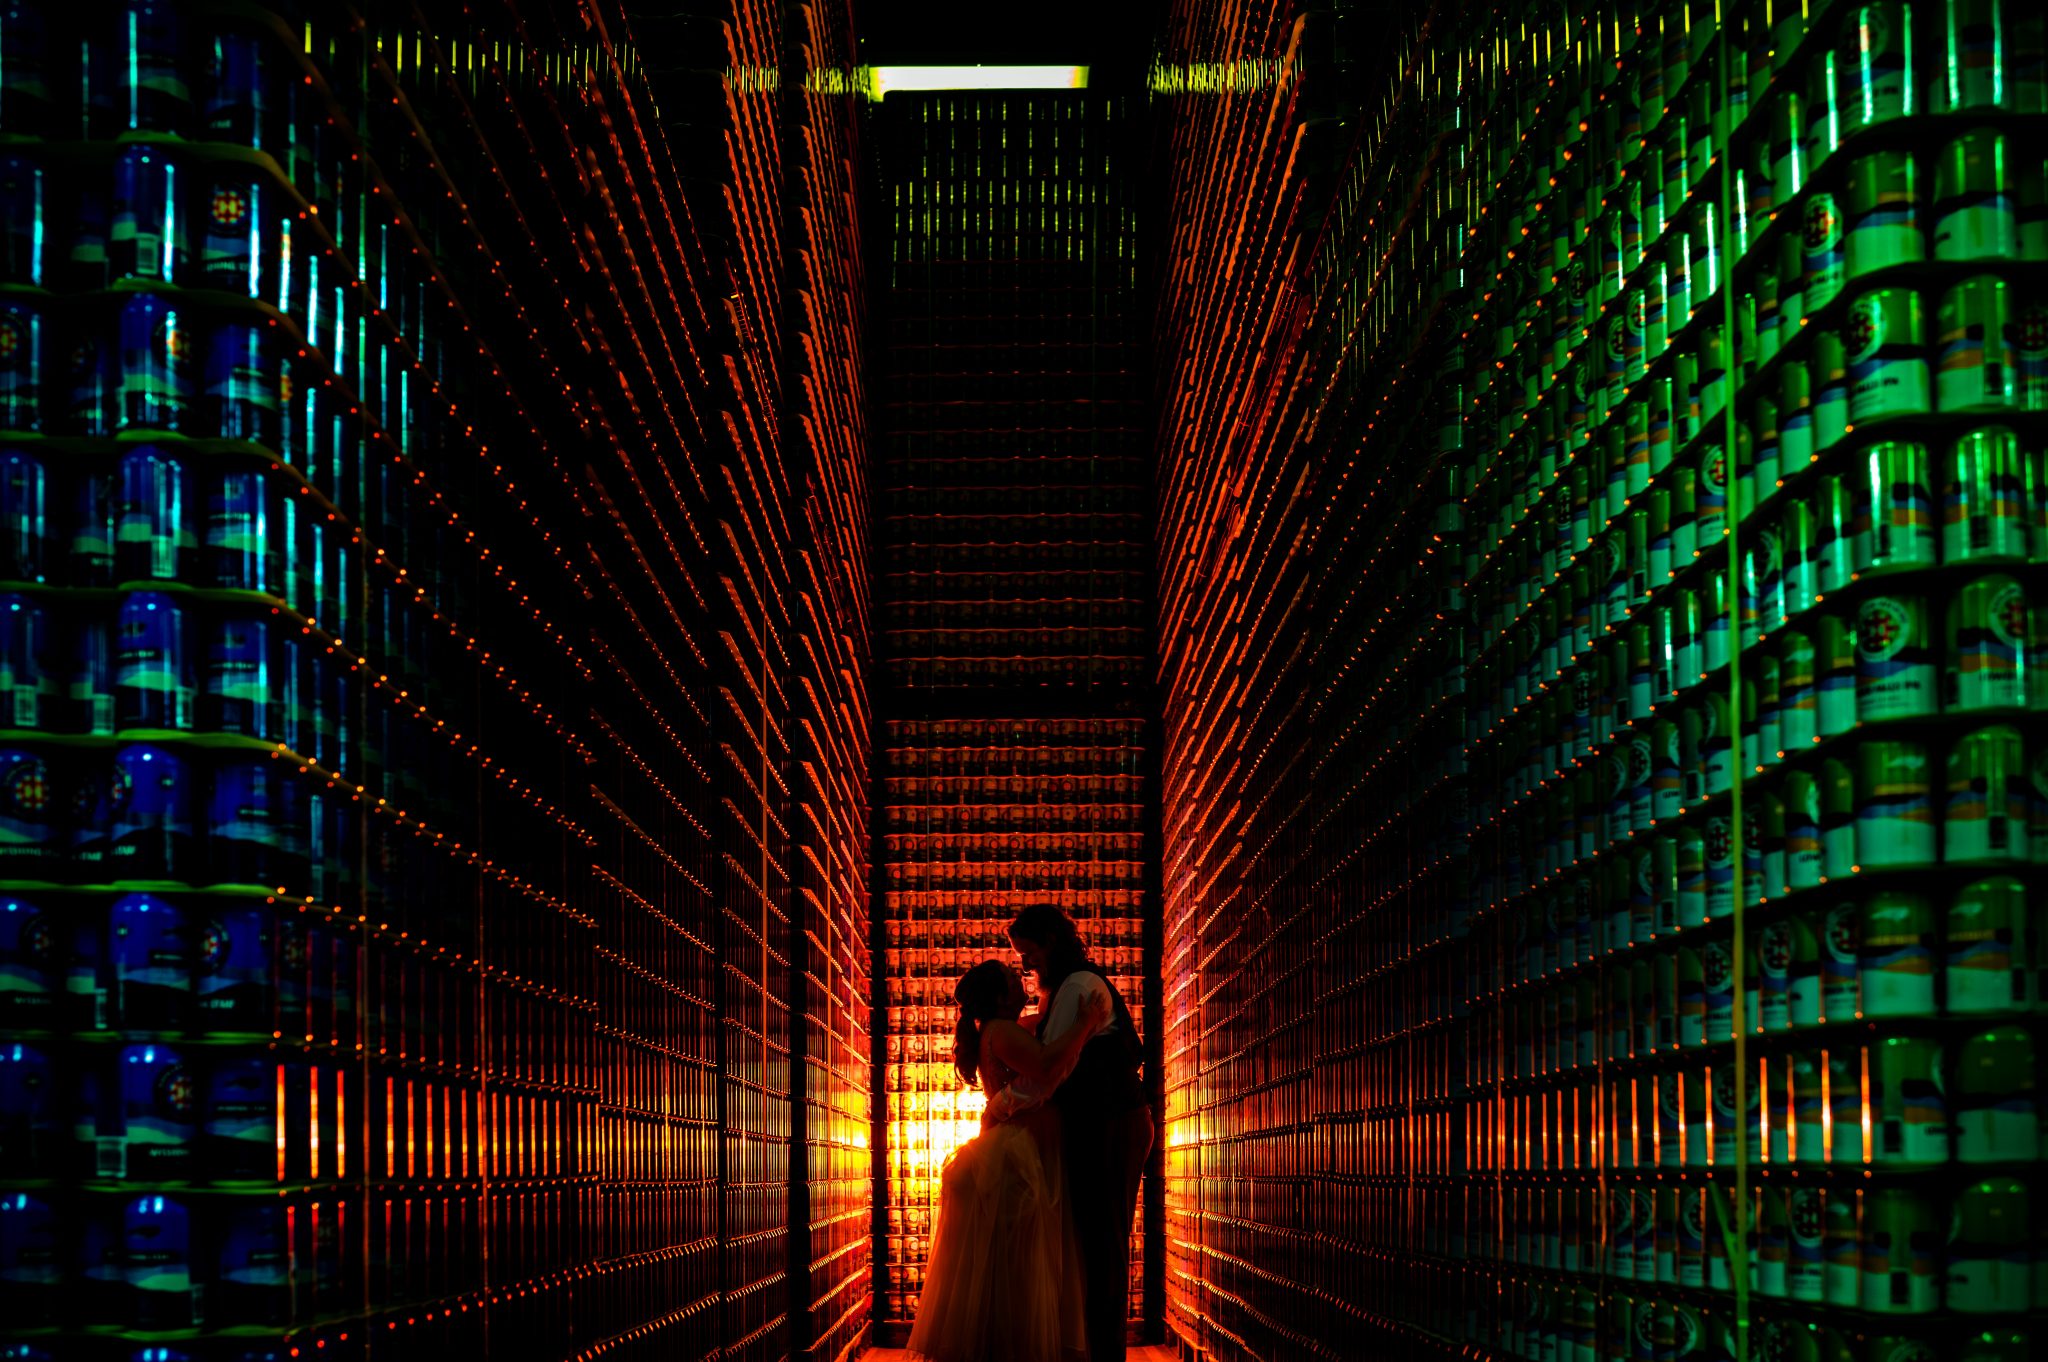 A couple celebrating their wedding at a wine cellar.